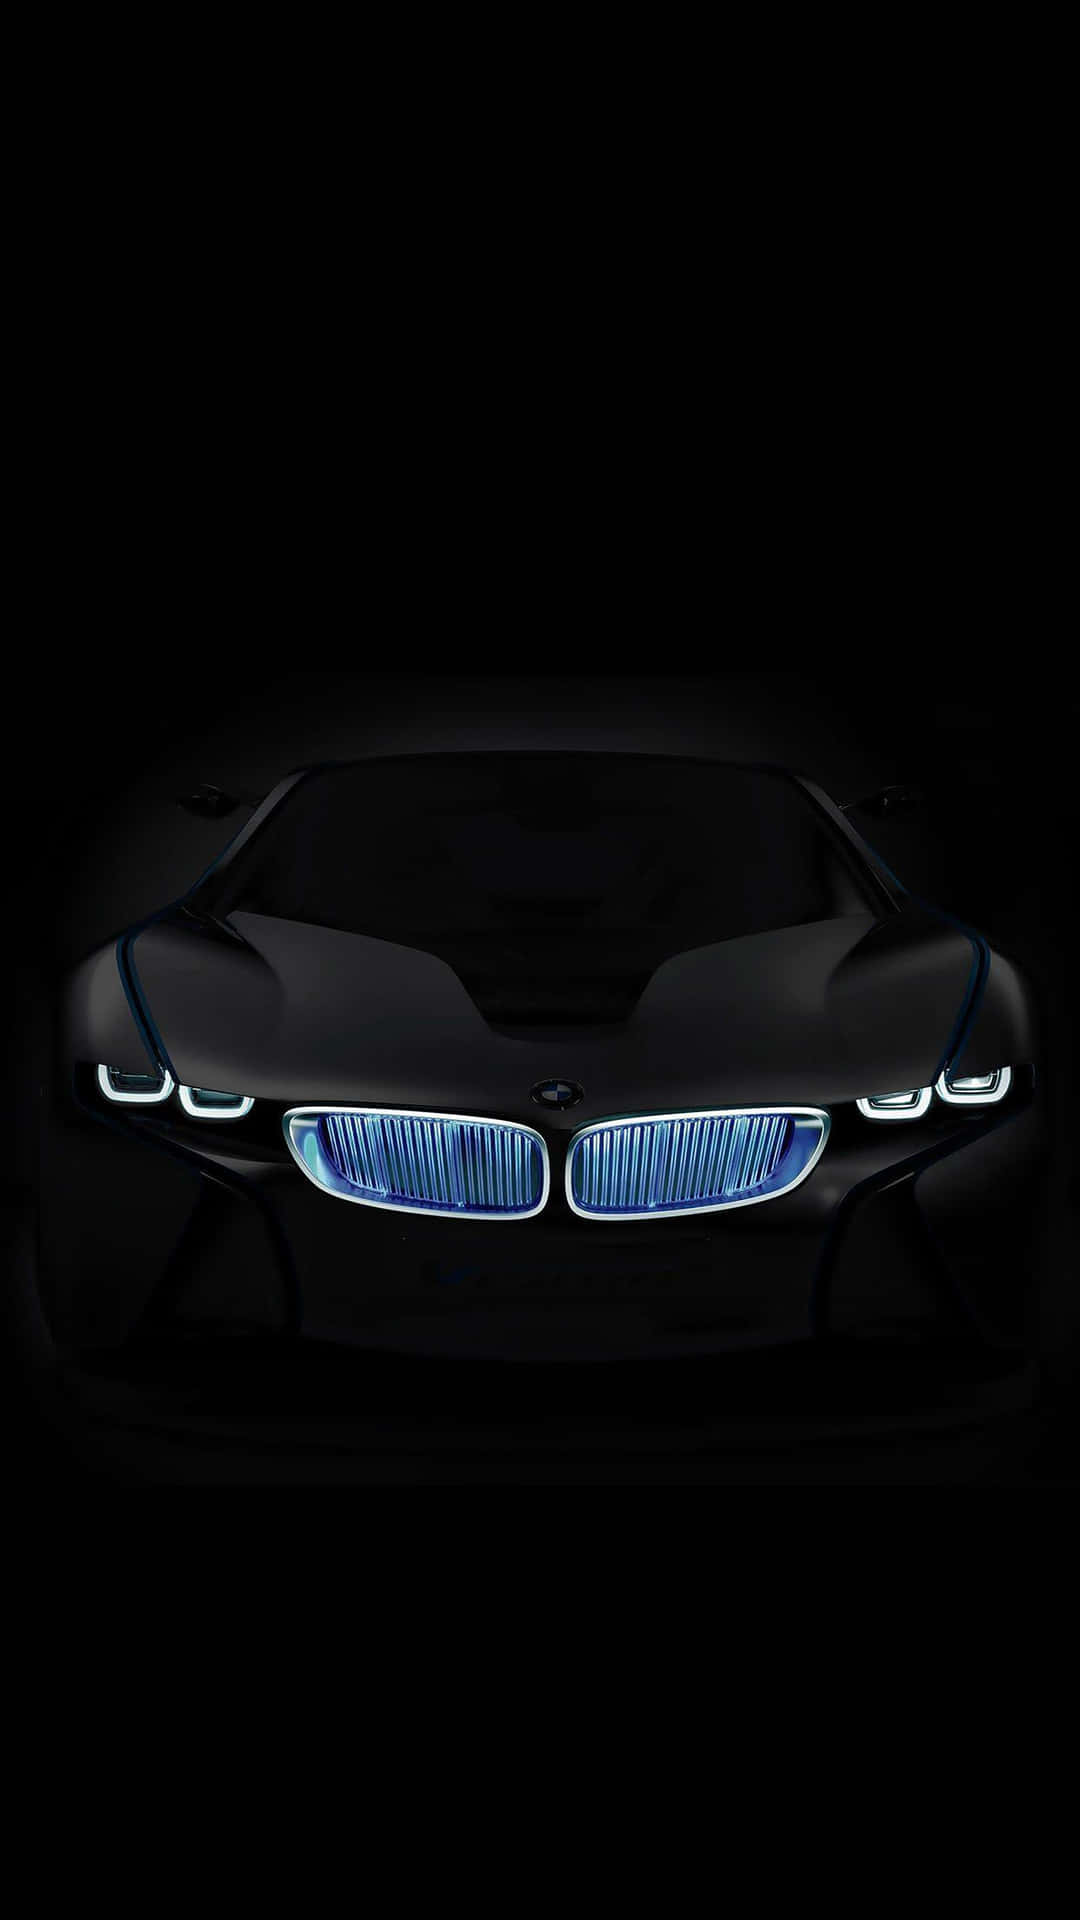 The BMW Android Wallpaper